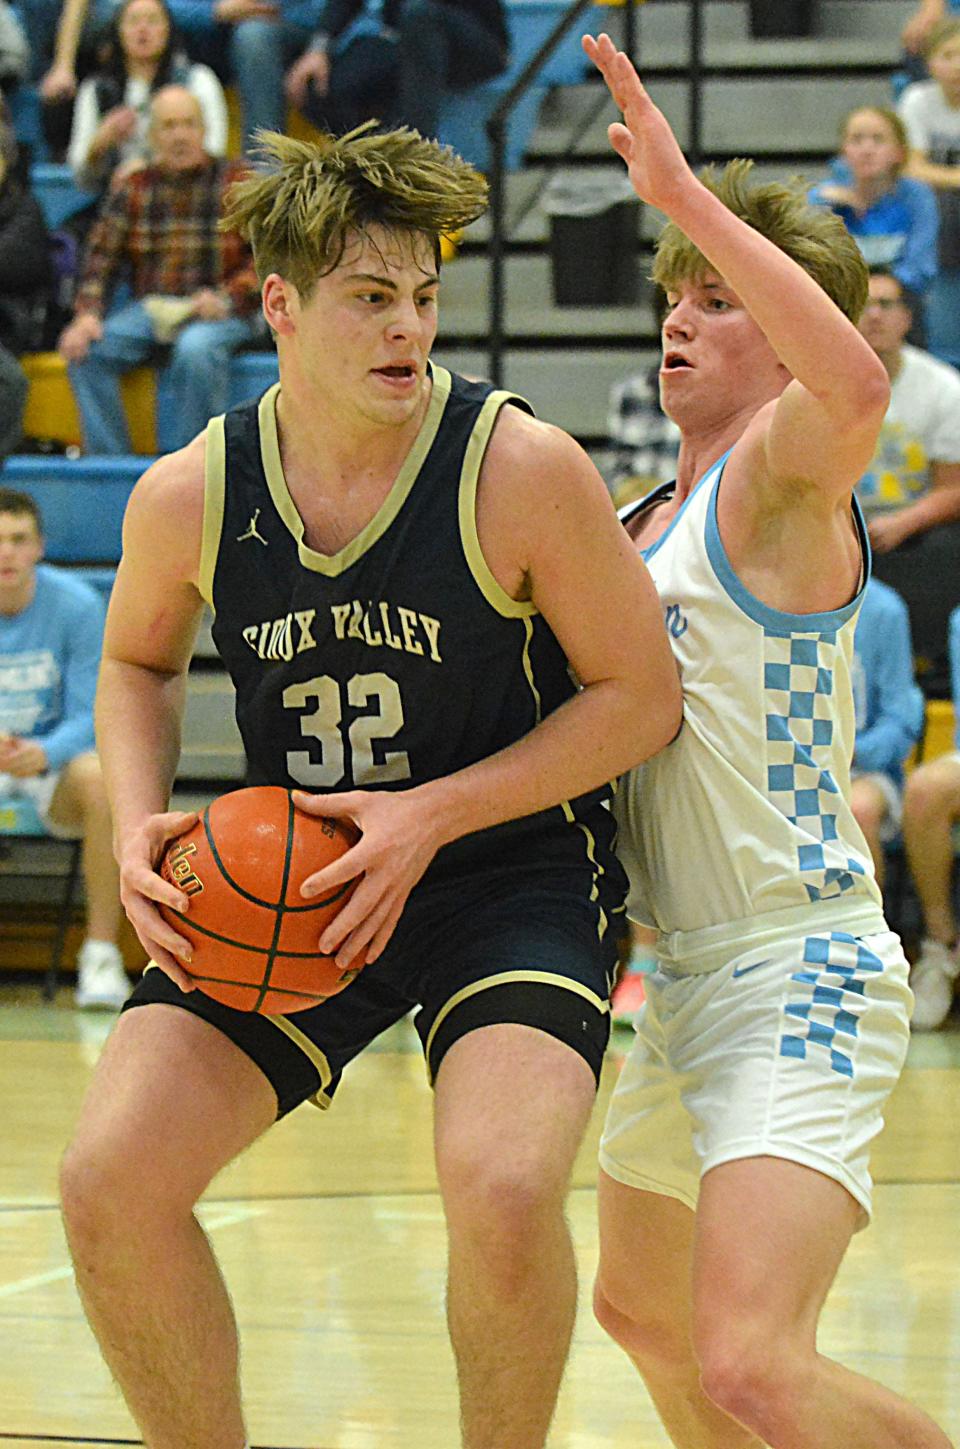 Sioux Valley's Hudsyn Ruesink works in the lane against Hamlin's Tyson Stevenson during their high school boys basketball game on Monday, Feb. 5, 2024 at the Hamlin Education Center. No. 2 Hamlin topped No. 4 Sioux Valley 80-48 in a battle of rated Class A teams.